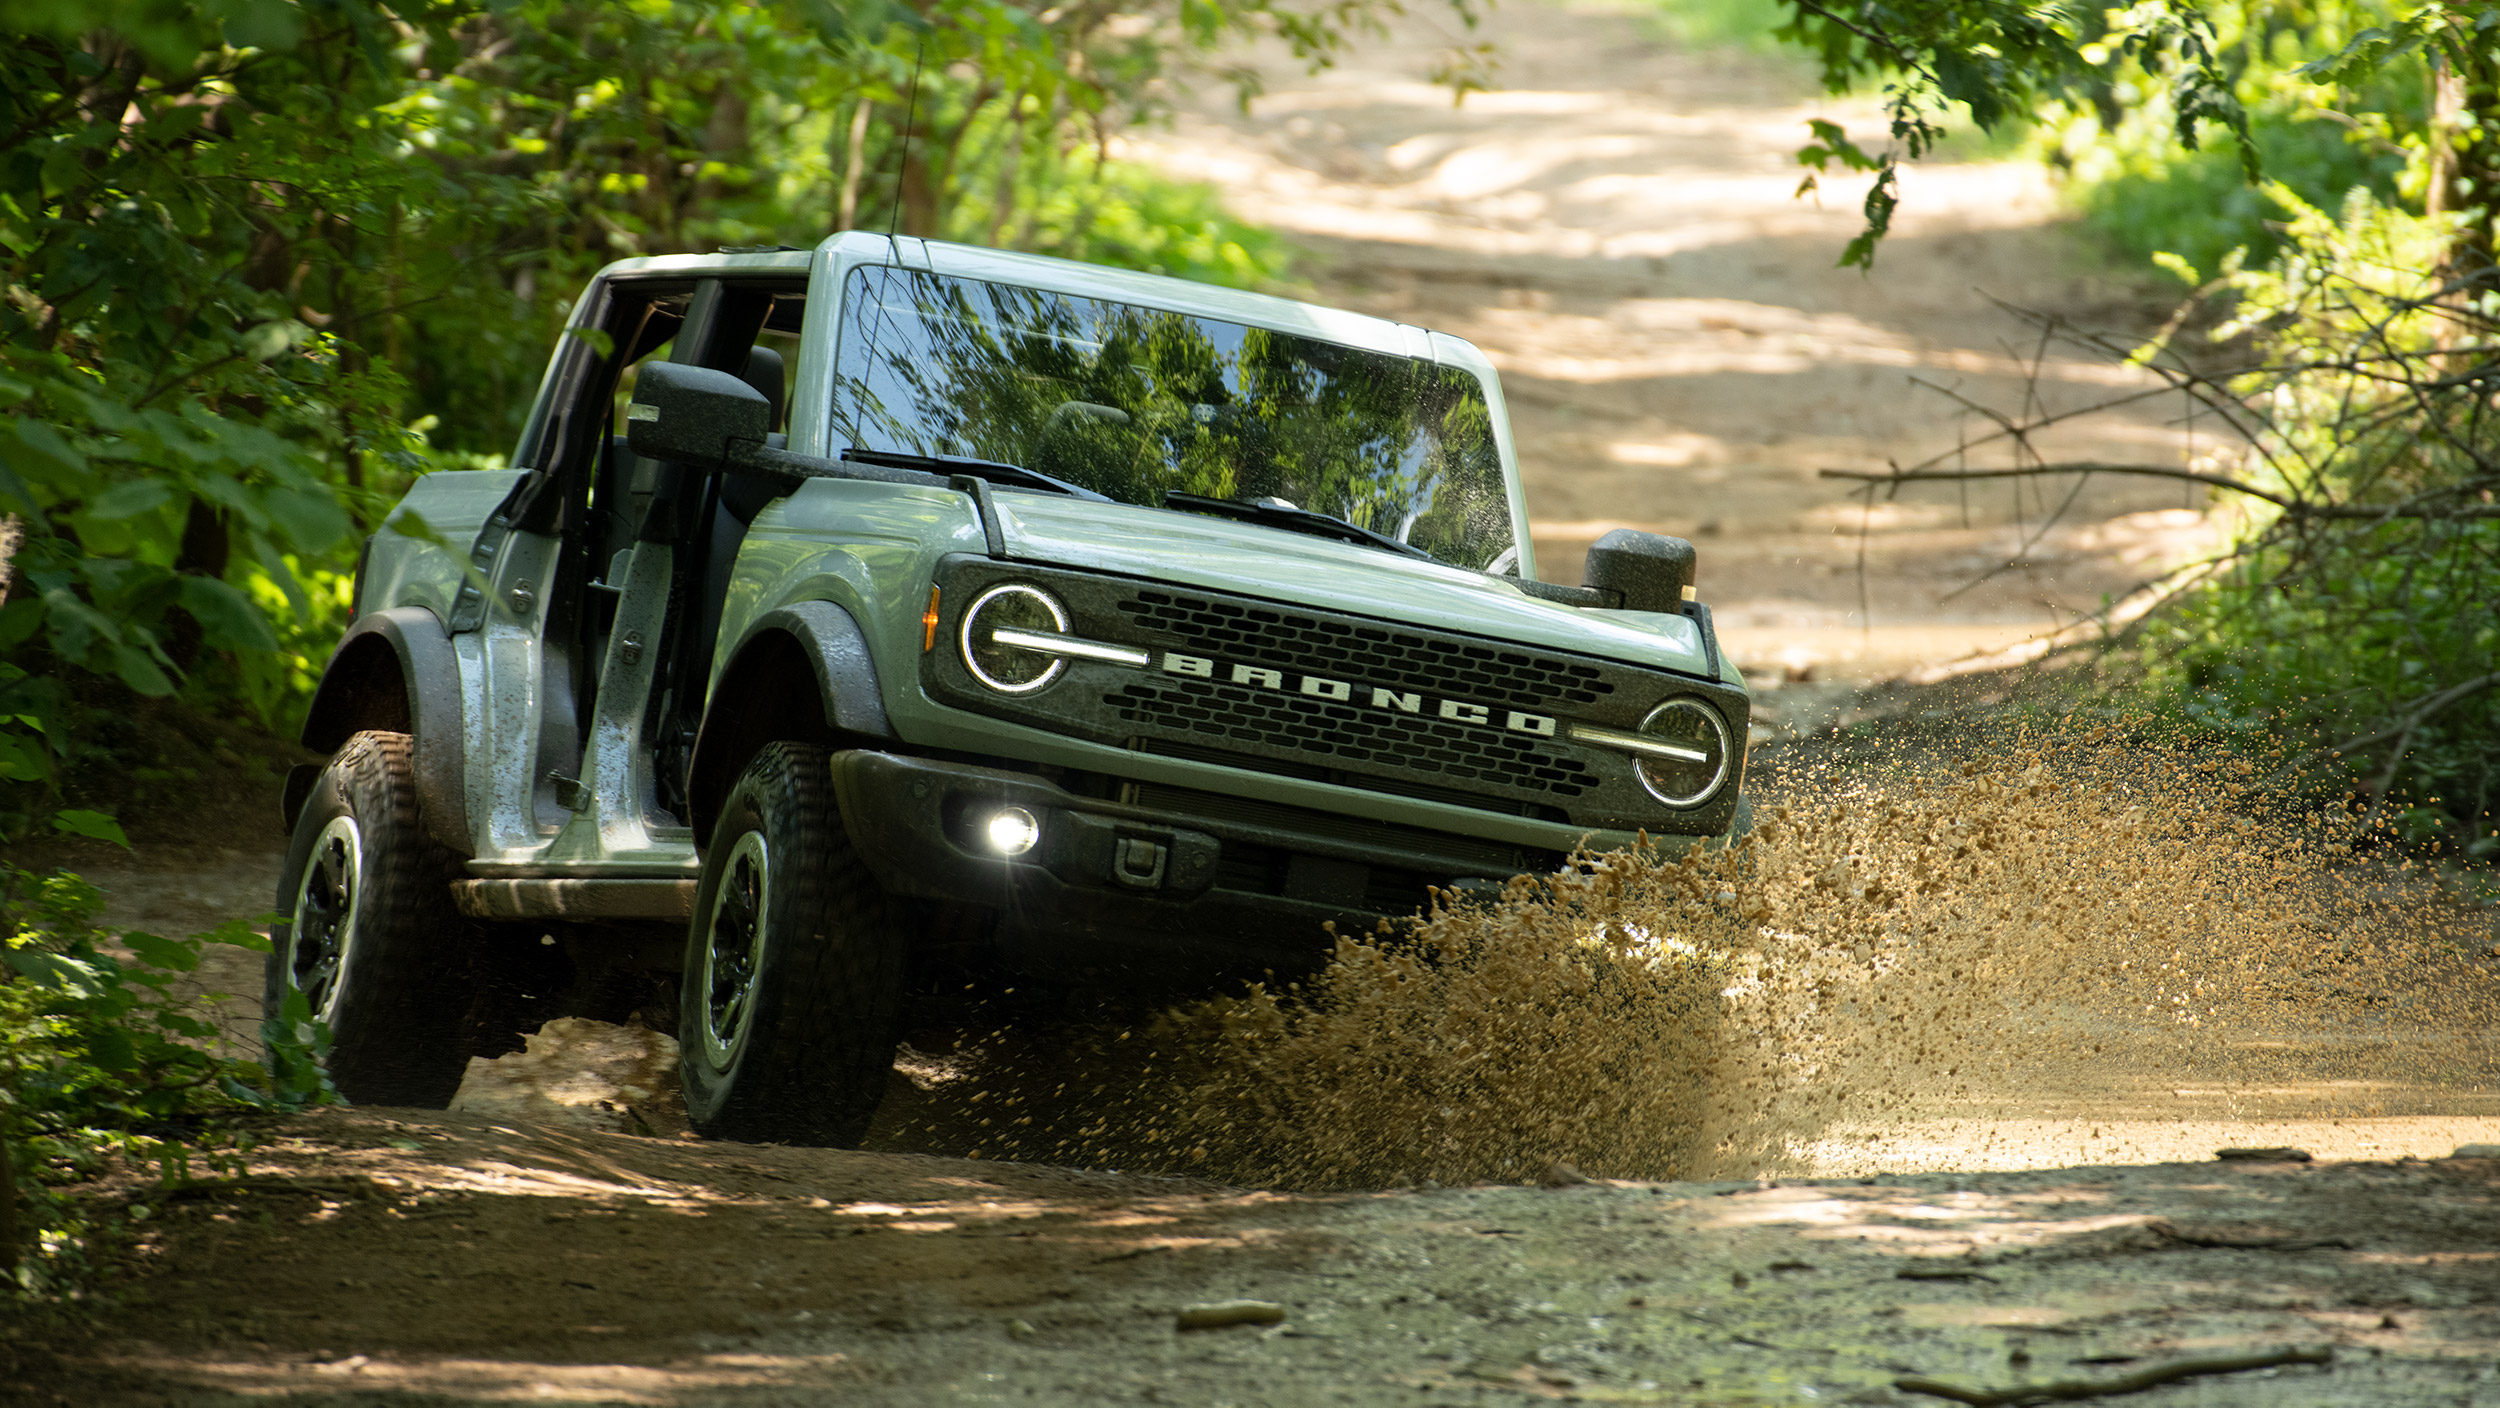 Made in Frame: The New Ford Bronco